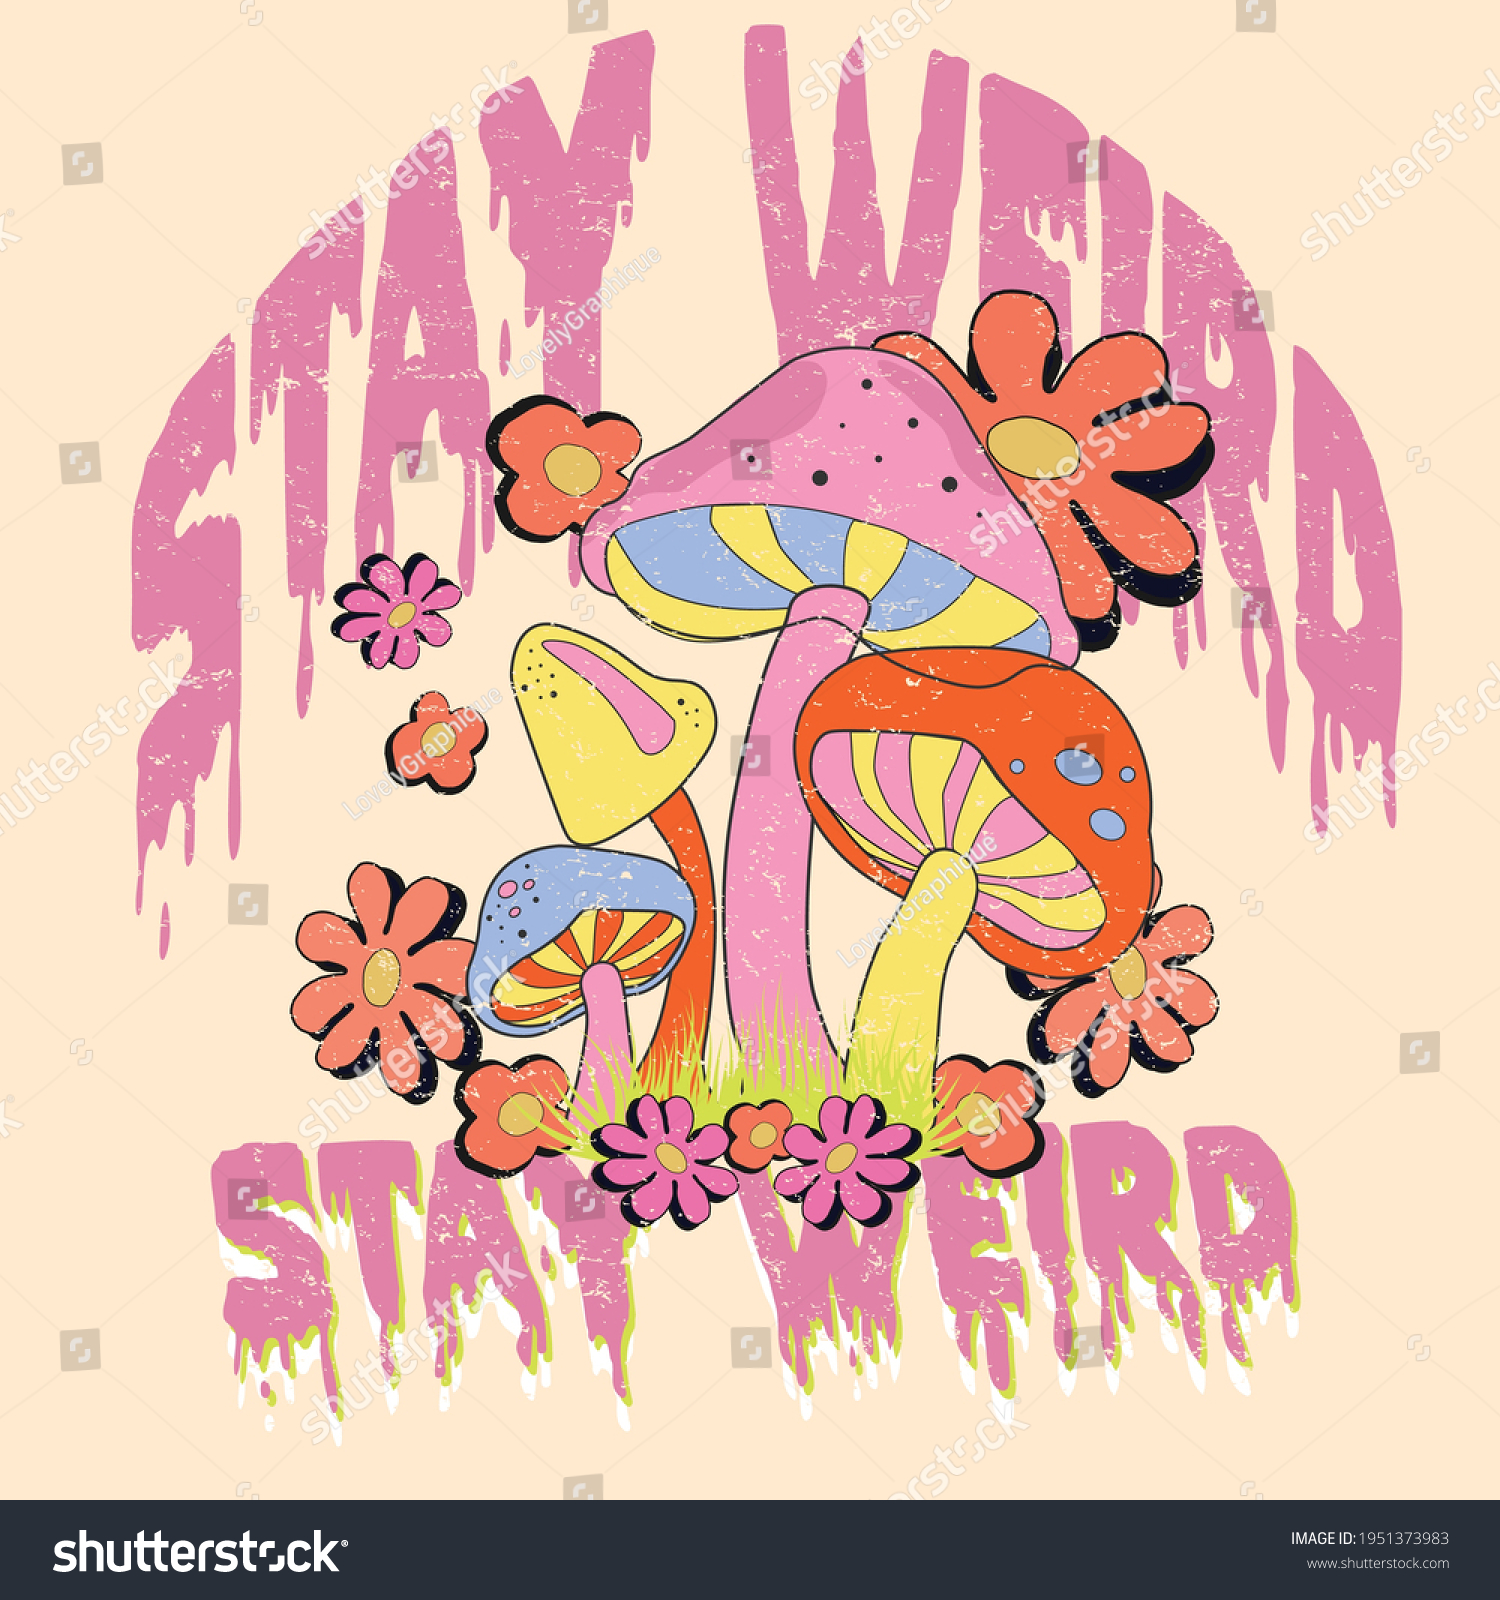 Stay weird Slogan Print with Hippie Style Flowers Background - 70's Groovy Themed Hand Drawn Abstract Graphic Tee Vector Sticker #1951373983